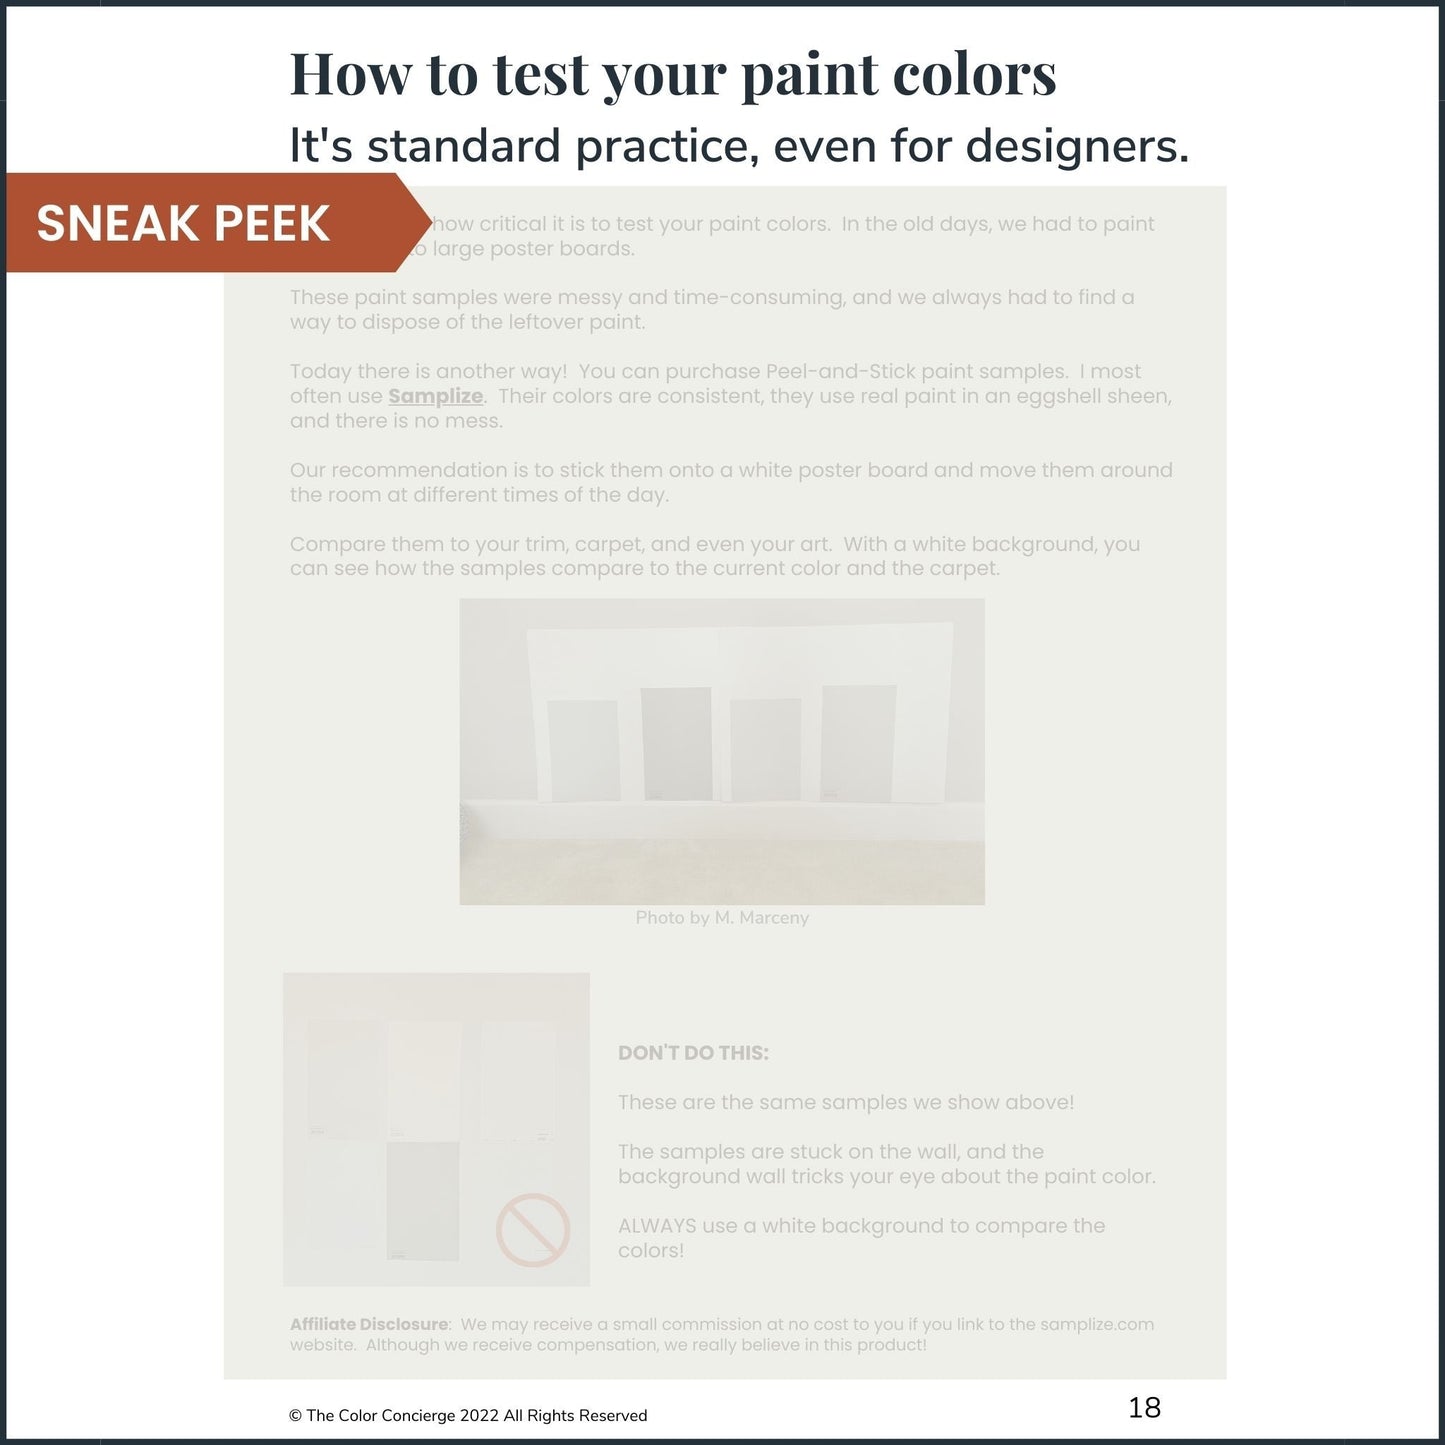 A page about how to test paint colors